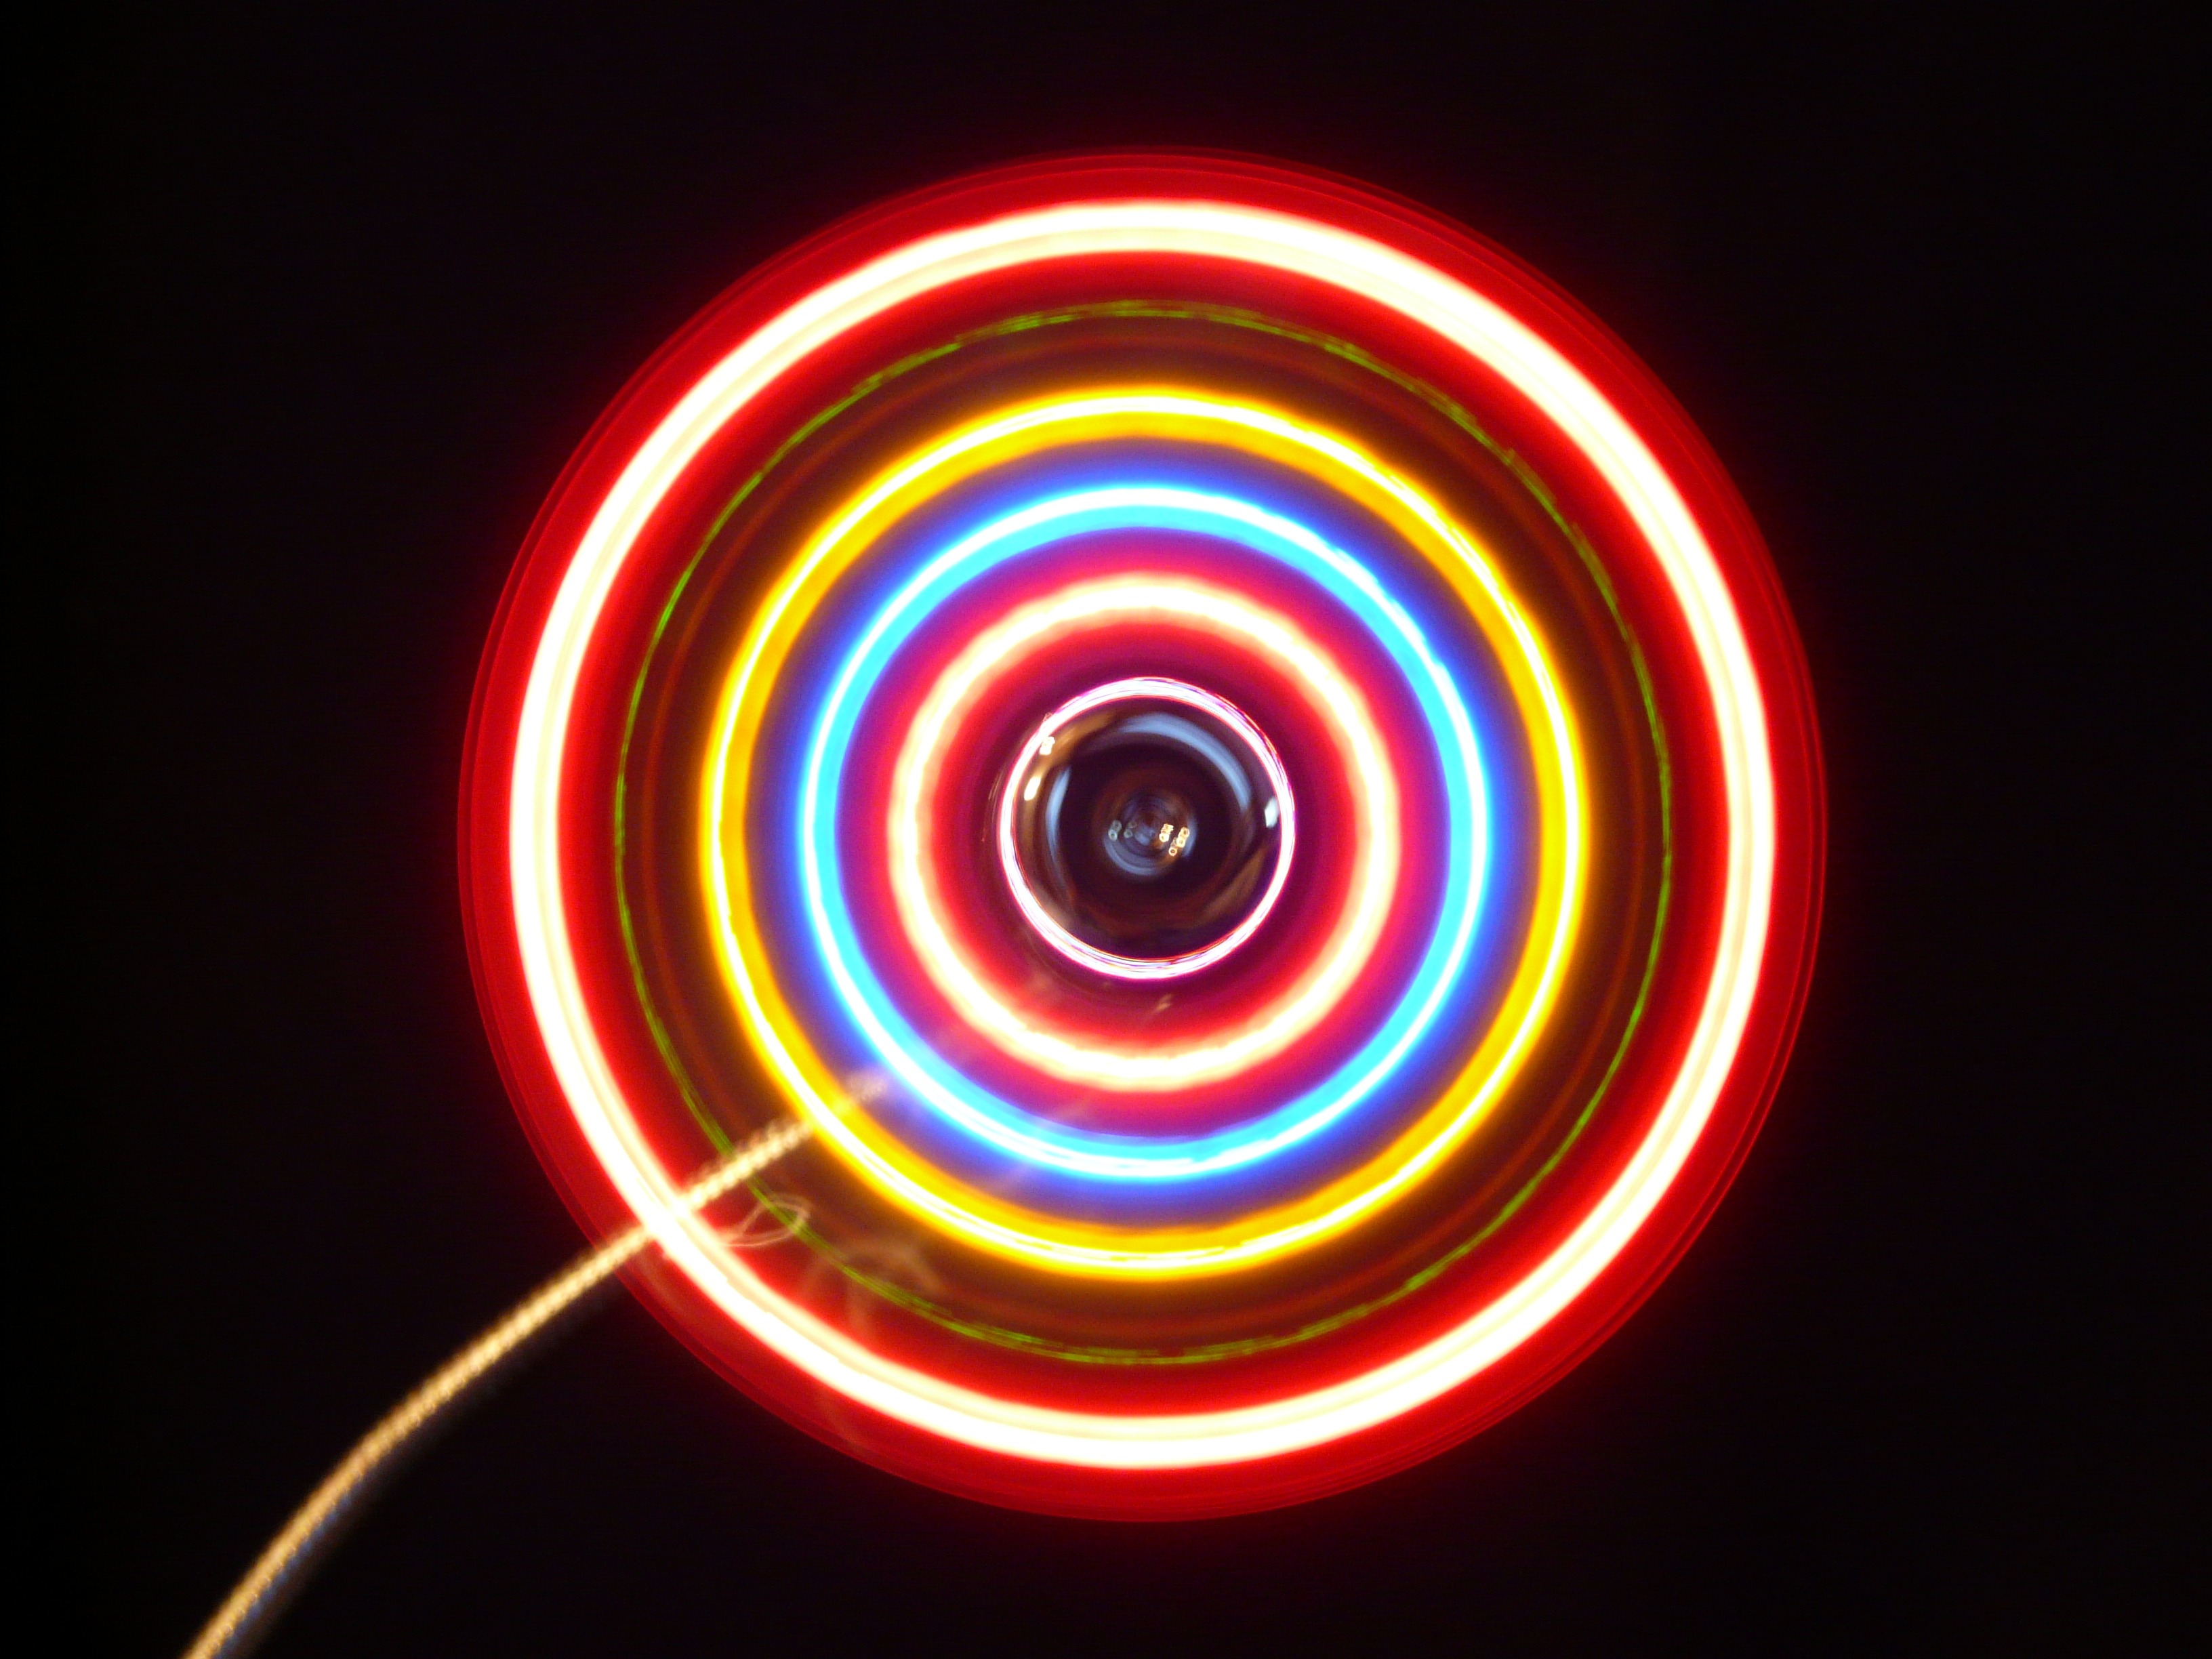 Free Image, light, night, air, spiral, mystical, dark, pattern, line, red, color, glow, colorful, fan, circle, farbenspiel, art, district, mysterious, sphere, turn, led, artificial, organ, shape, cooling, about, rotate, mouth guard